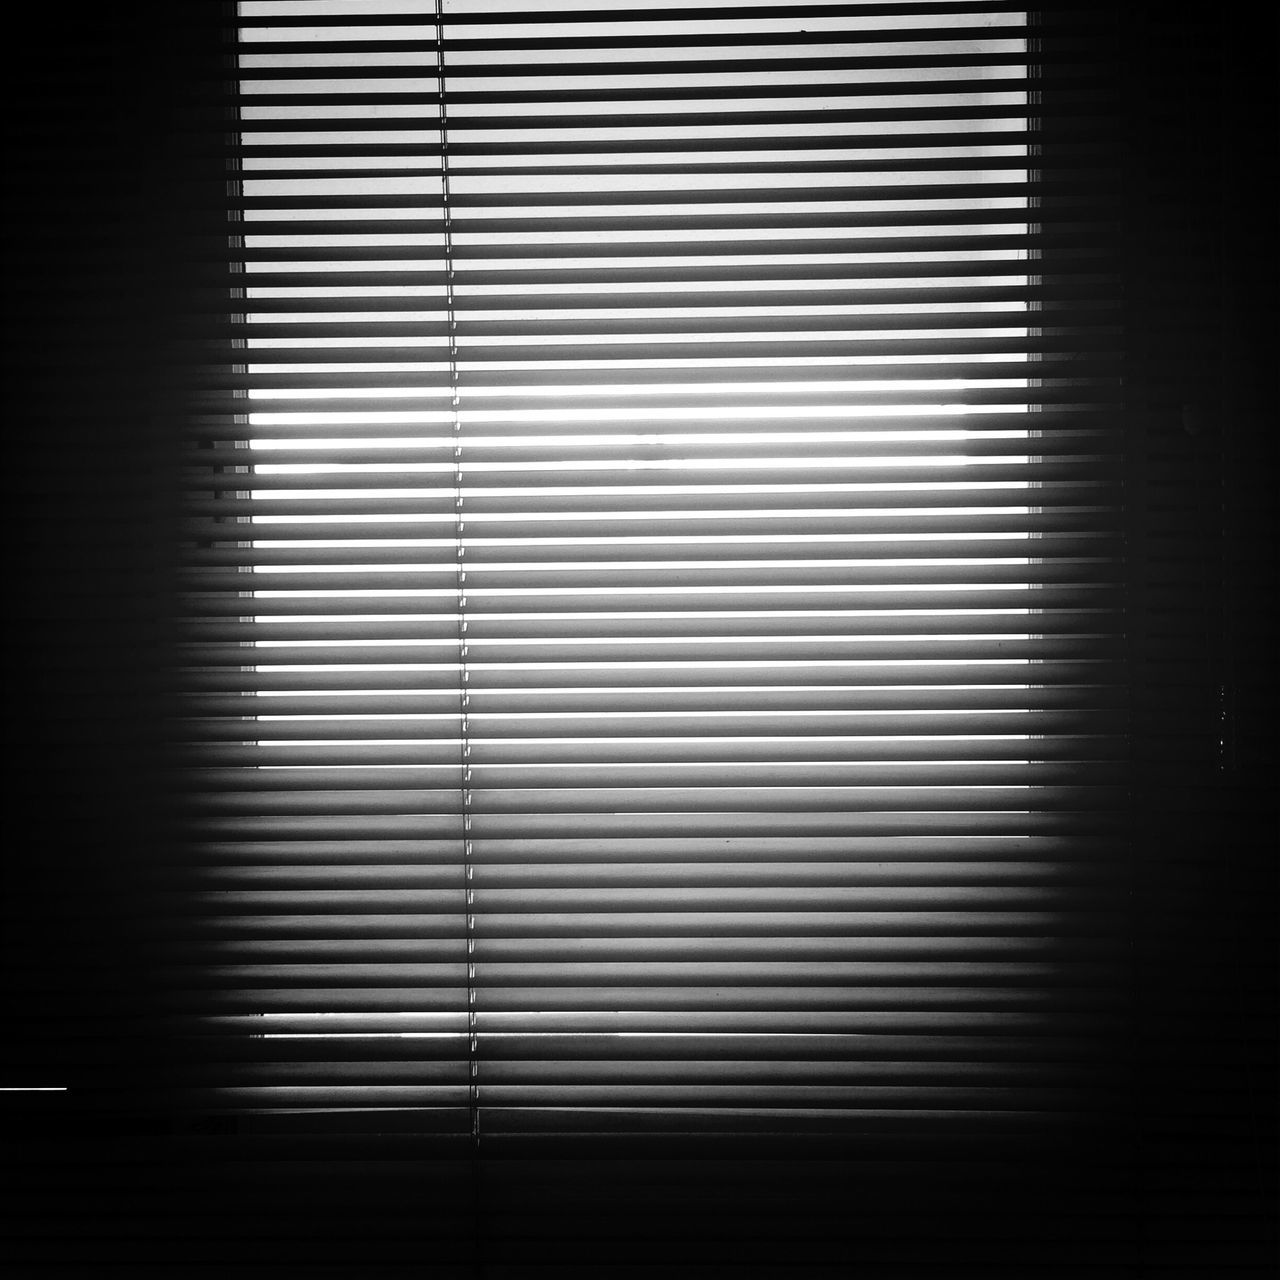 indoors, window, pattern, full frame, backgrounds, wall - building feature, built structure, blinds, architecture, closed, curtain, wall, no people, dark, home interior, house, close-up, textured, design, shadow